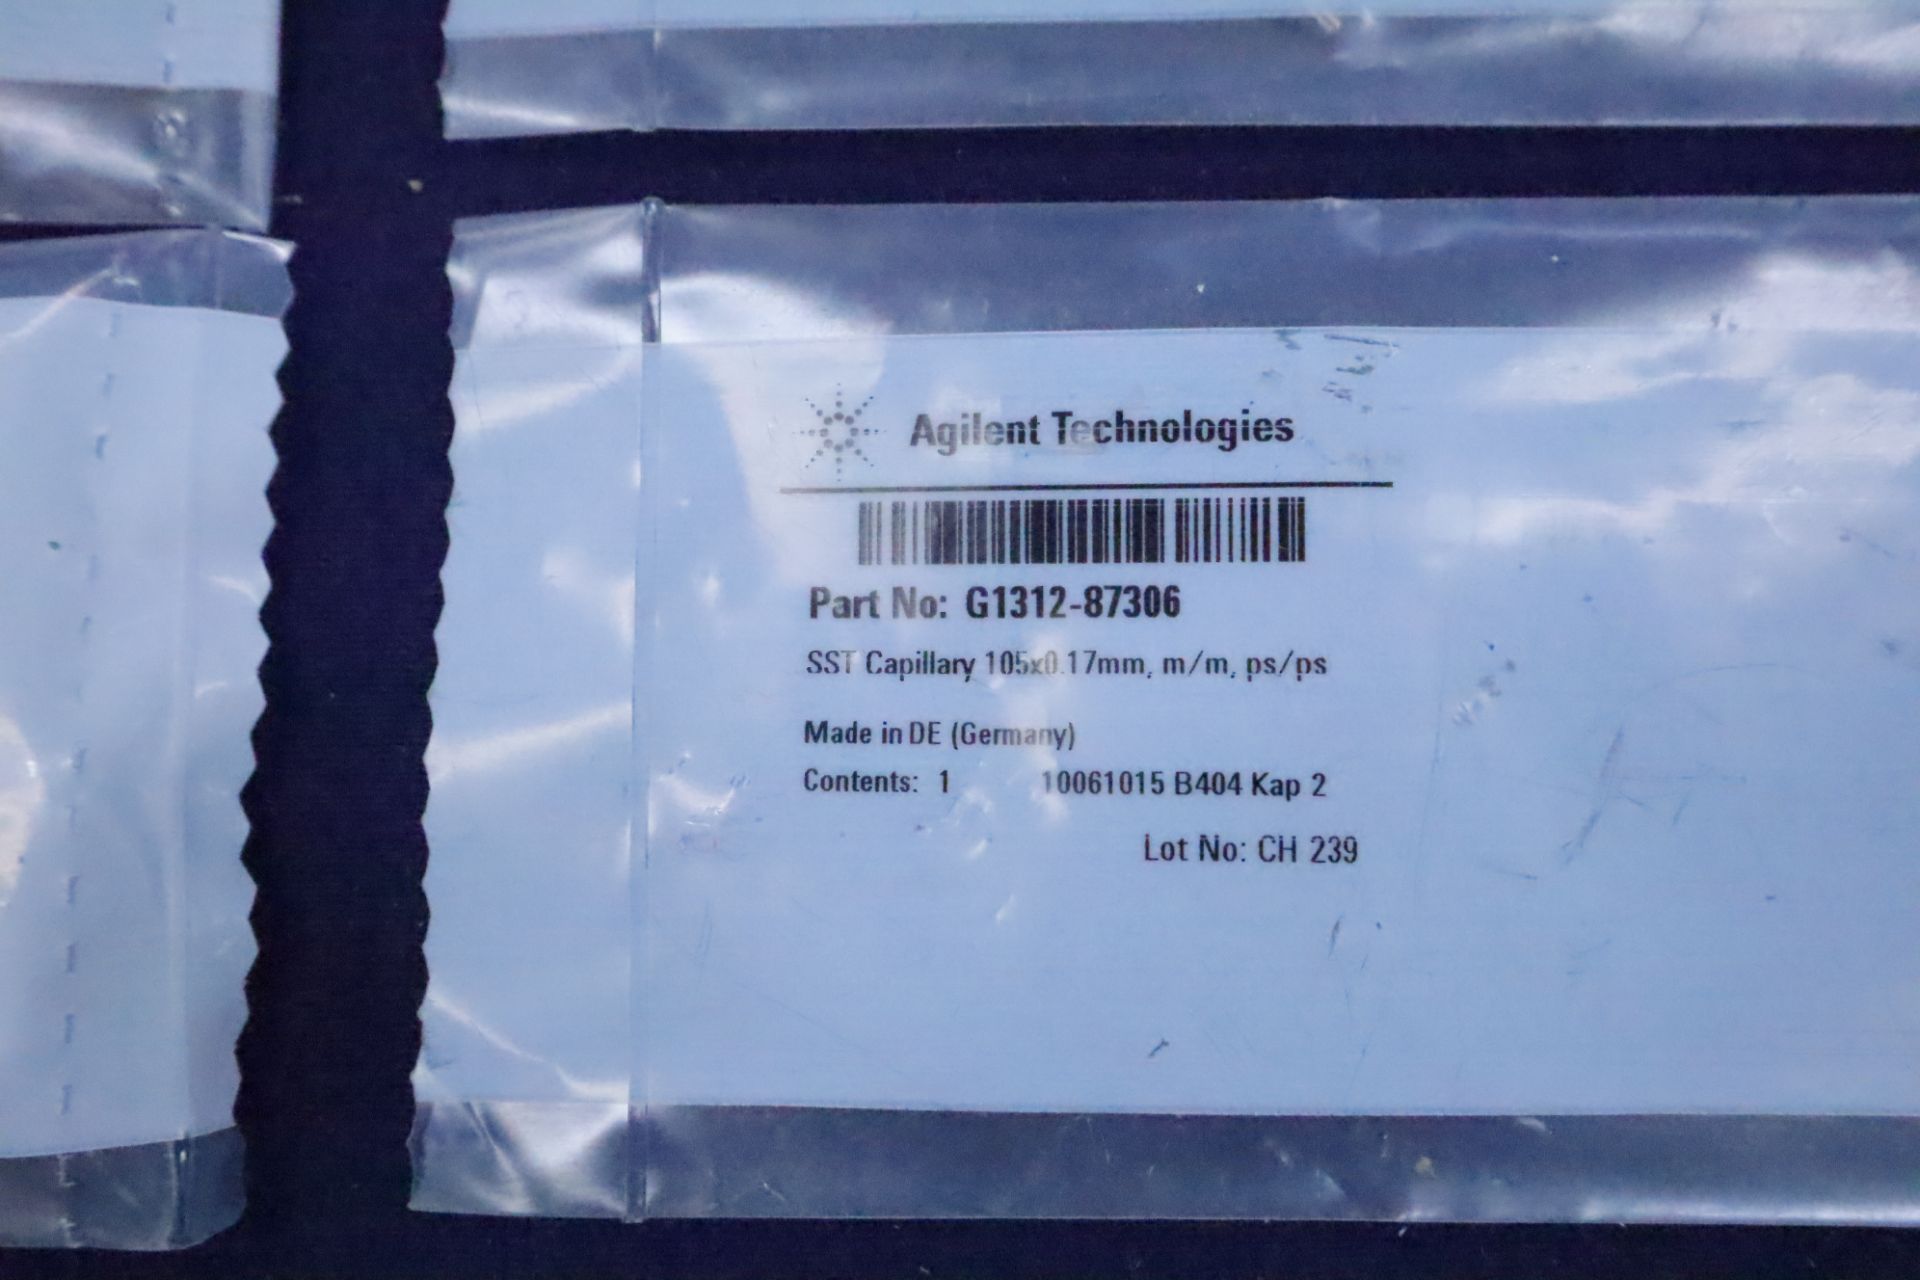 (NIB) Agilent Technologies OEM Replacement Parts for LC/MS Machines - Image 12 of 23